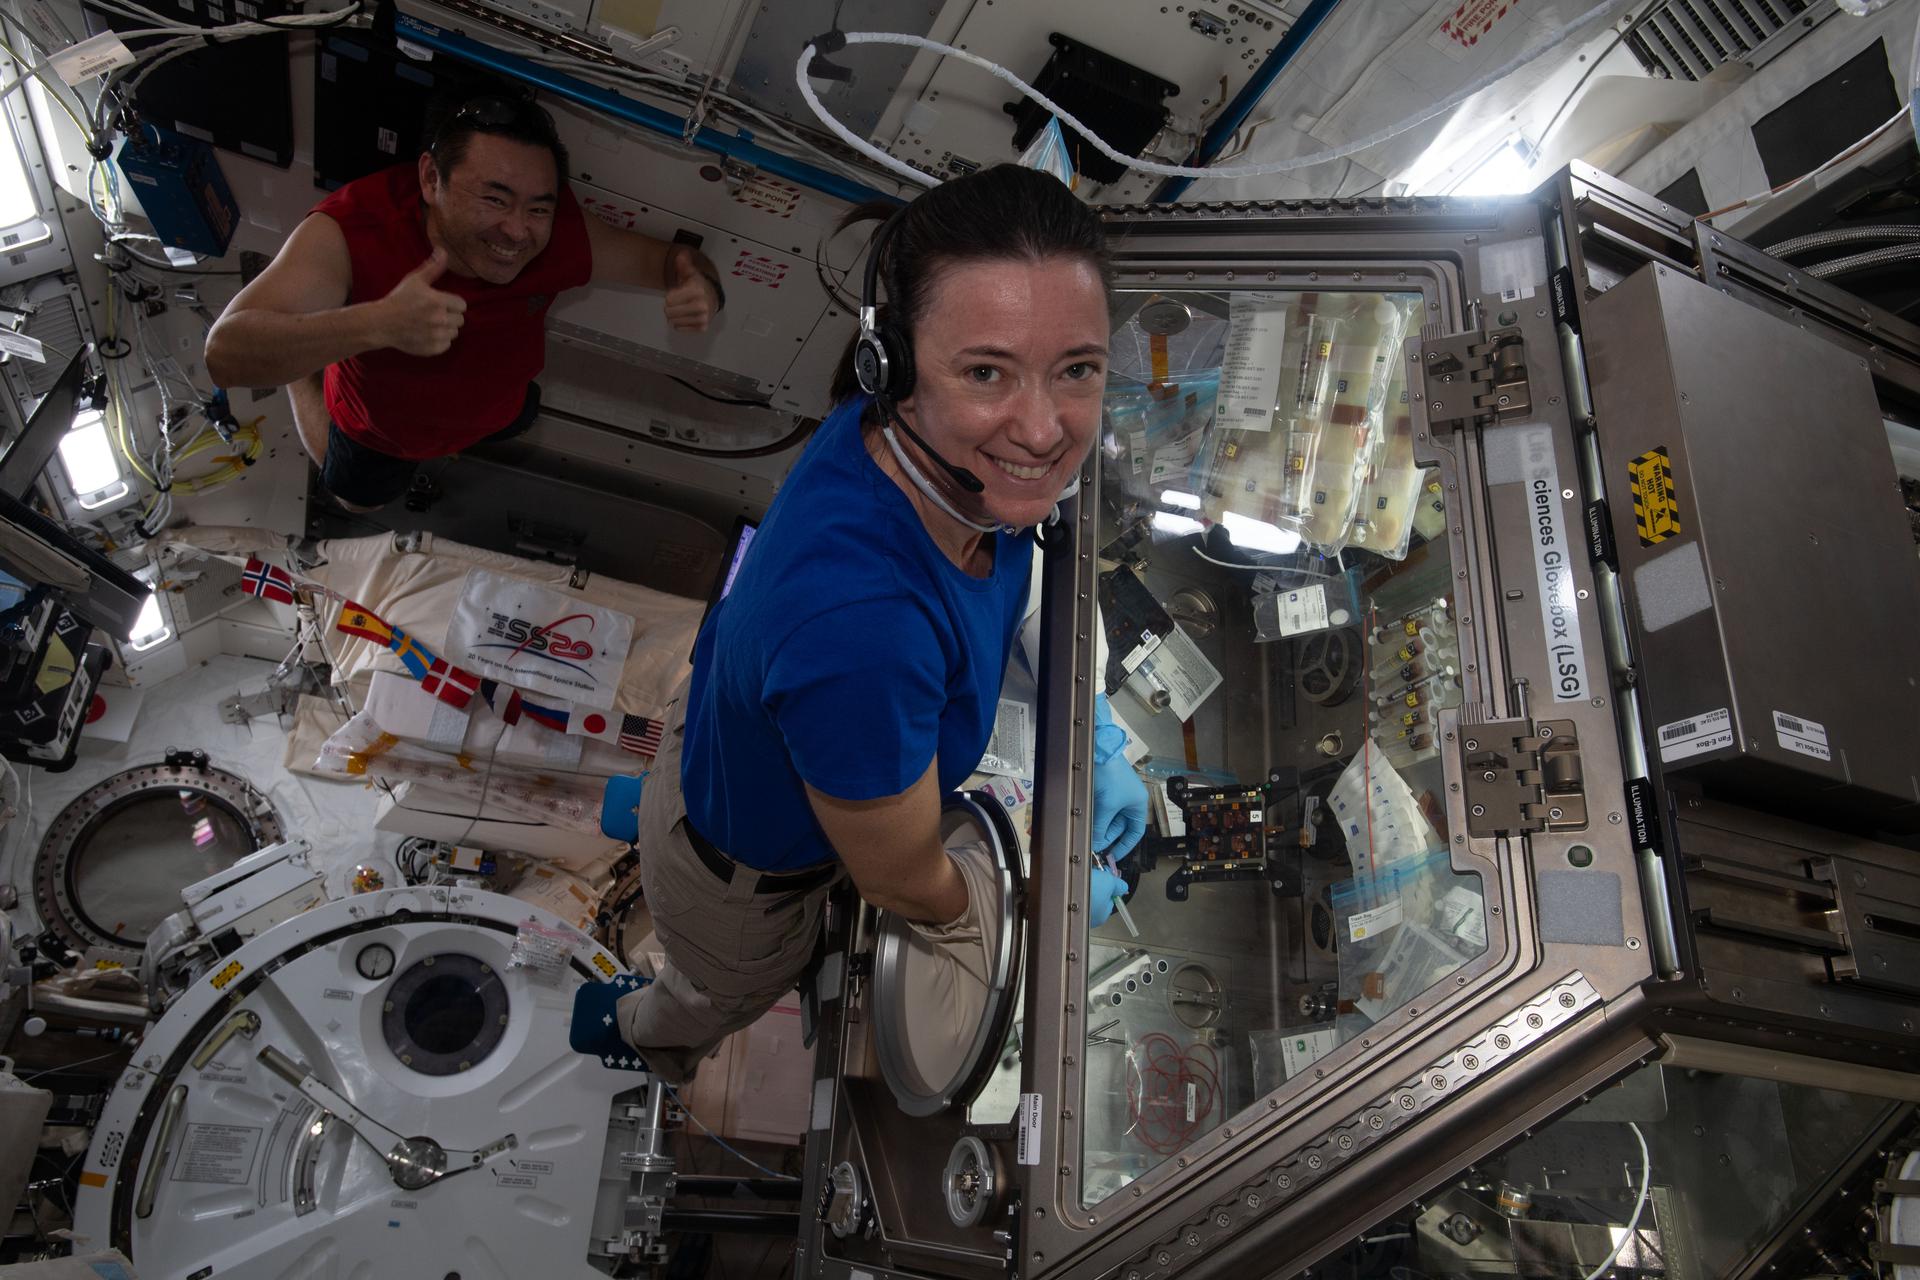 McArthur, in the foreground wearing a short-sleeved blue shirt, khaki pants, and a headset, has her arms inside a large, clear experiment box that has multiple sample bags attached to its side. Hoshide, wearing a red sleeveless shirt, is giving two thumbs-up in the background. There is a large, circular hatch between them and a storage bag with an “ISS 20” patch on it and a string of flags from international partners across it.